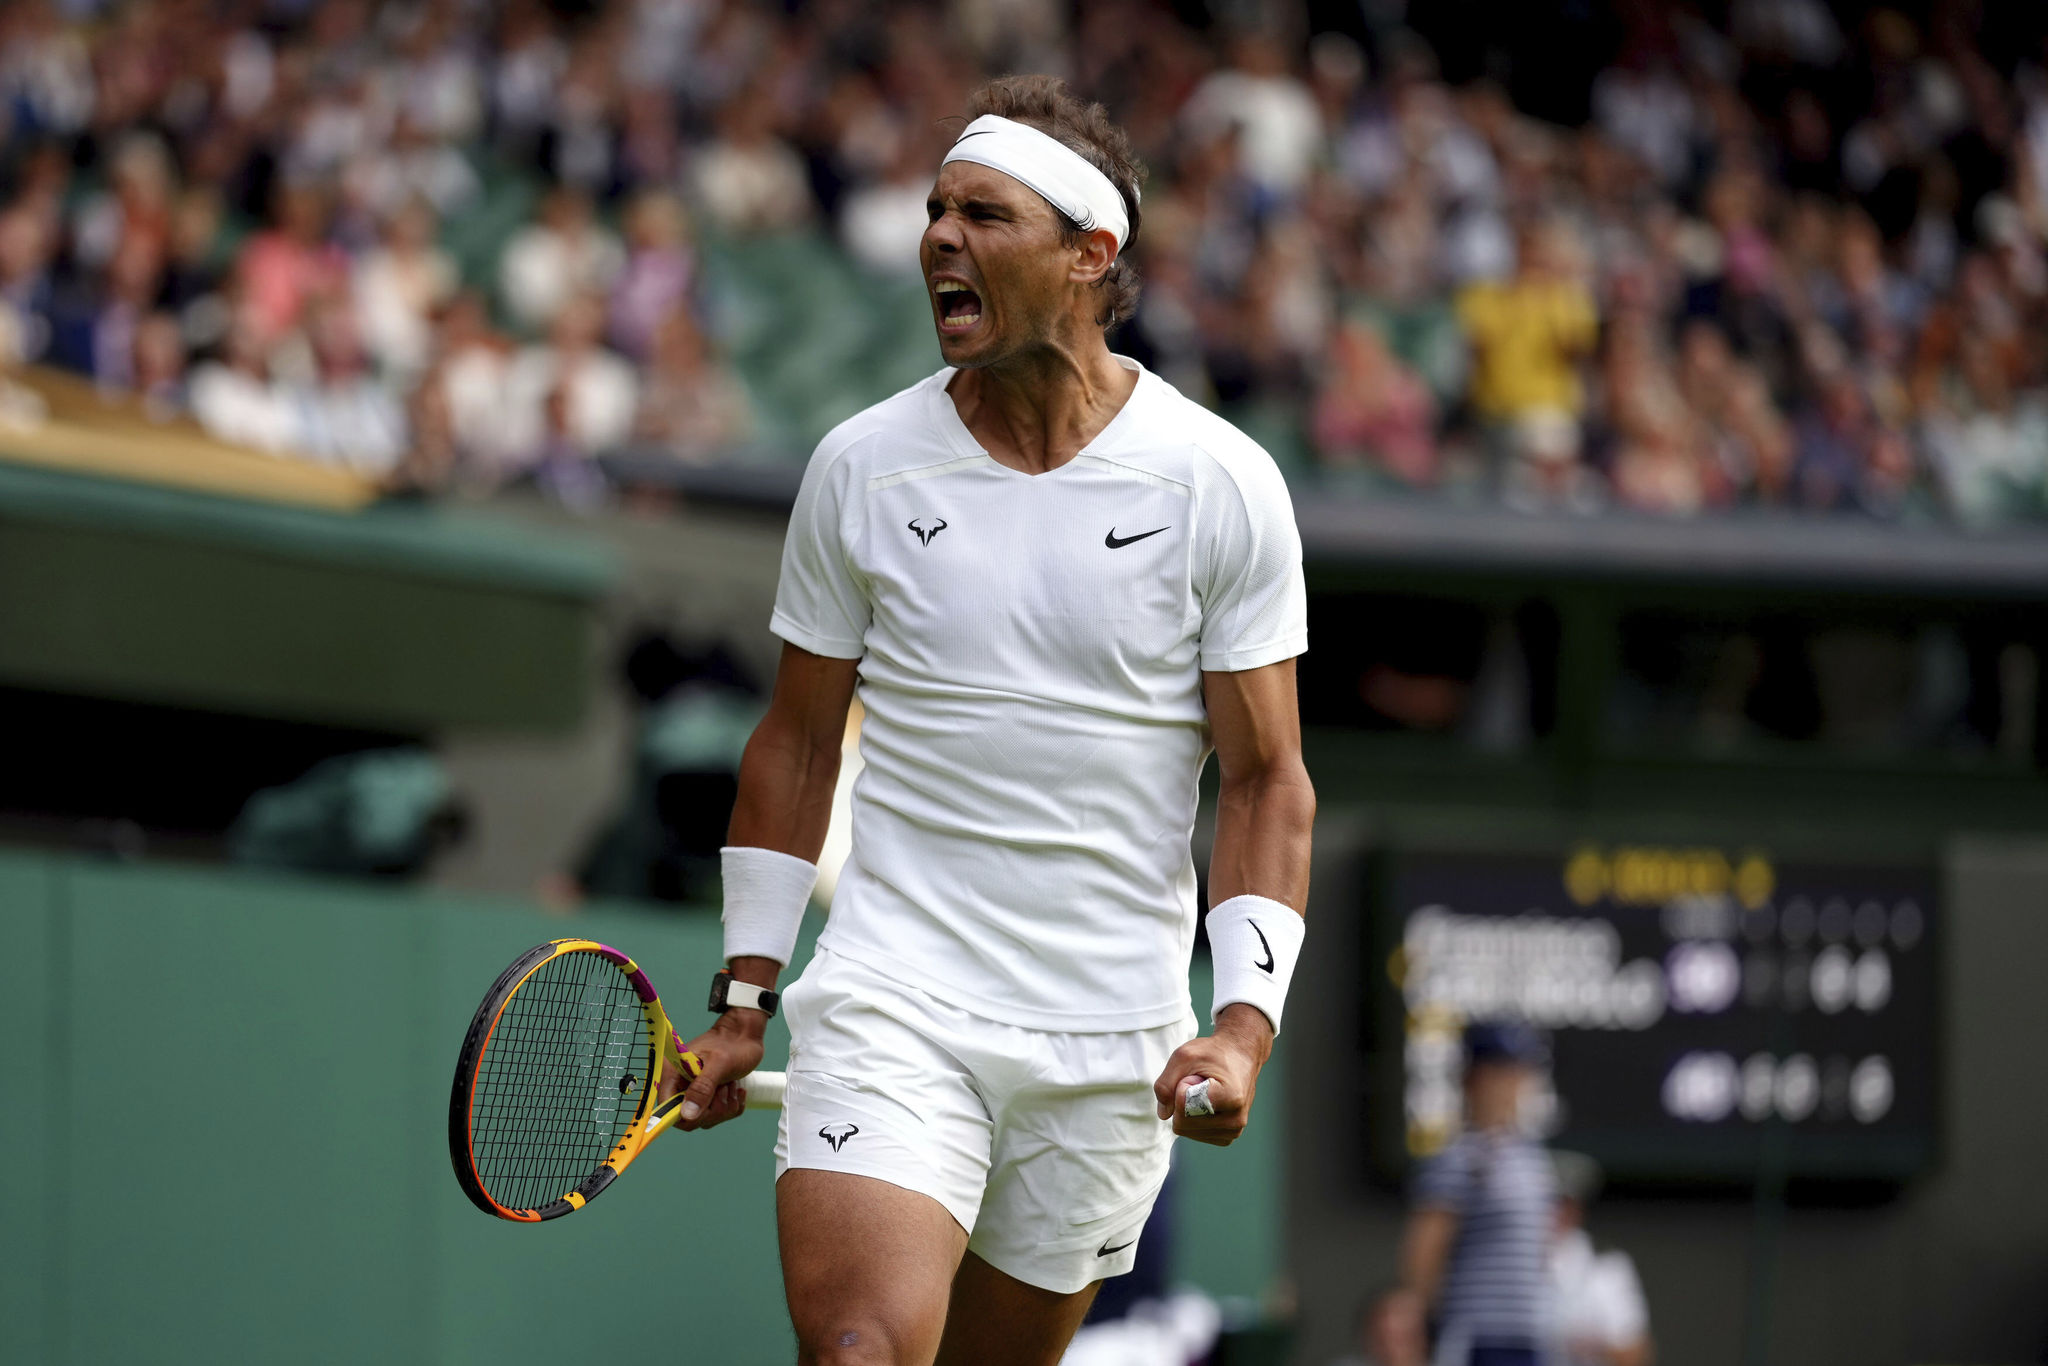 Spain's Rafael  lt;HIT gt;Nadal lt;/HIT gt; celebrates beating Argentina's Francisco Cerundolo in a first round men's singles match on day two of the Wimbledon tennis championships in London, Tuesday, June 28, 2022. (John Walton/PA via AP)